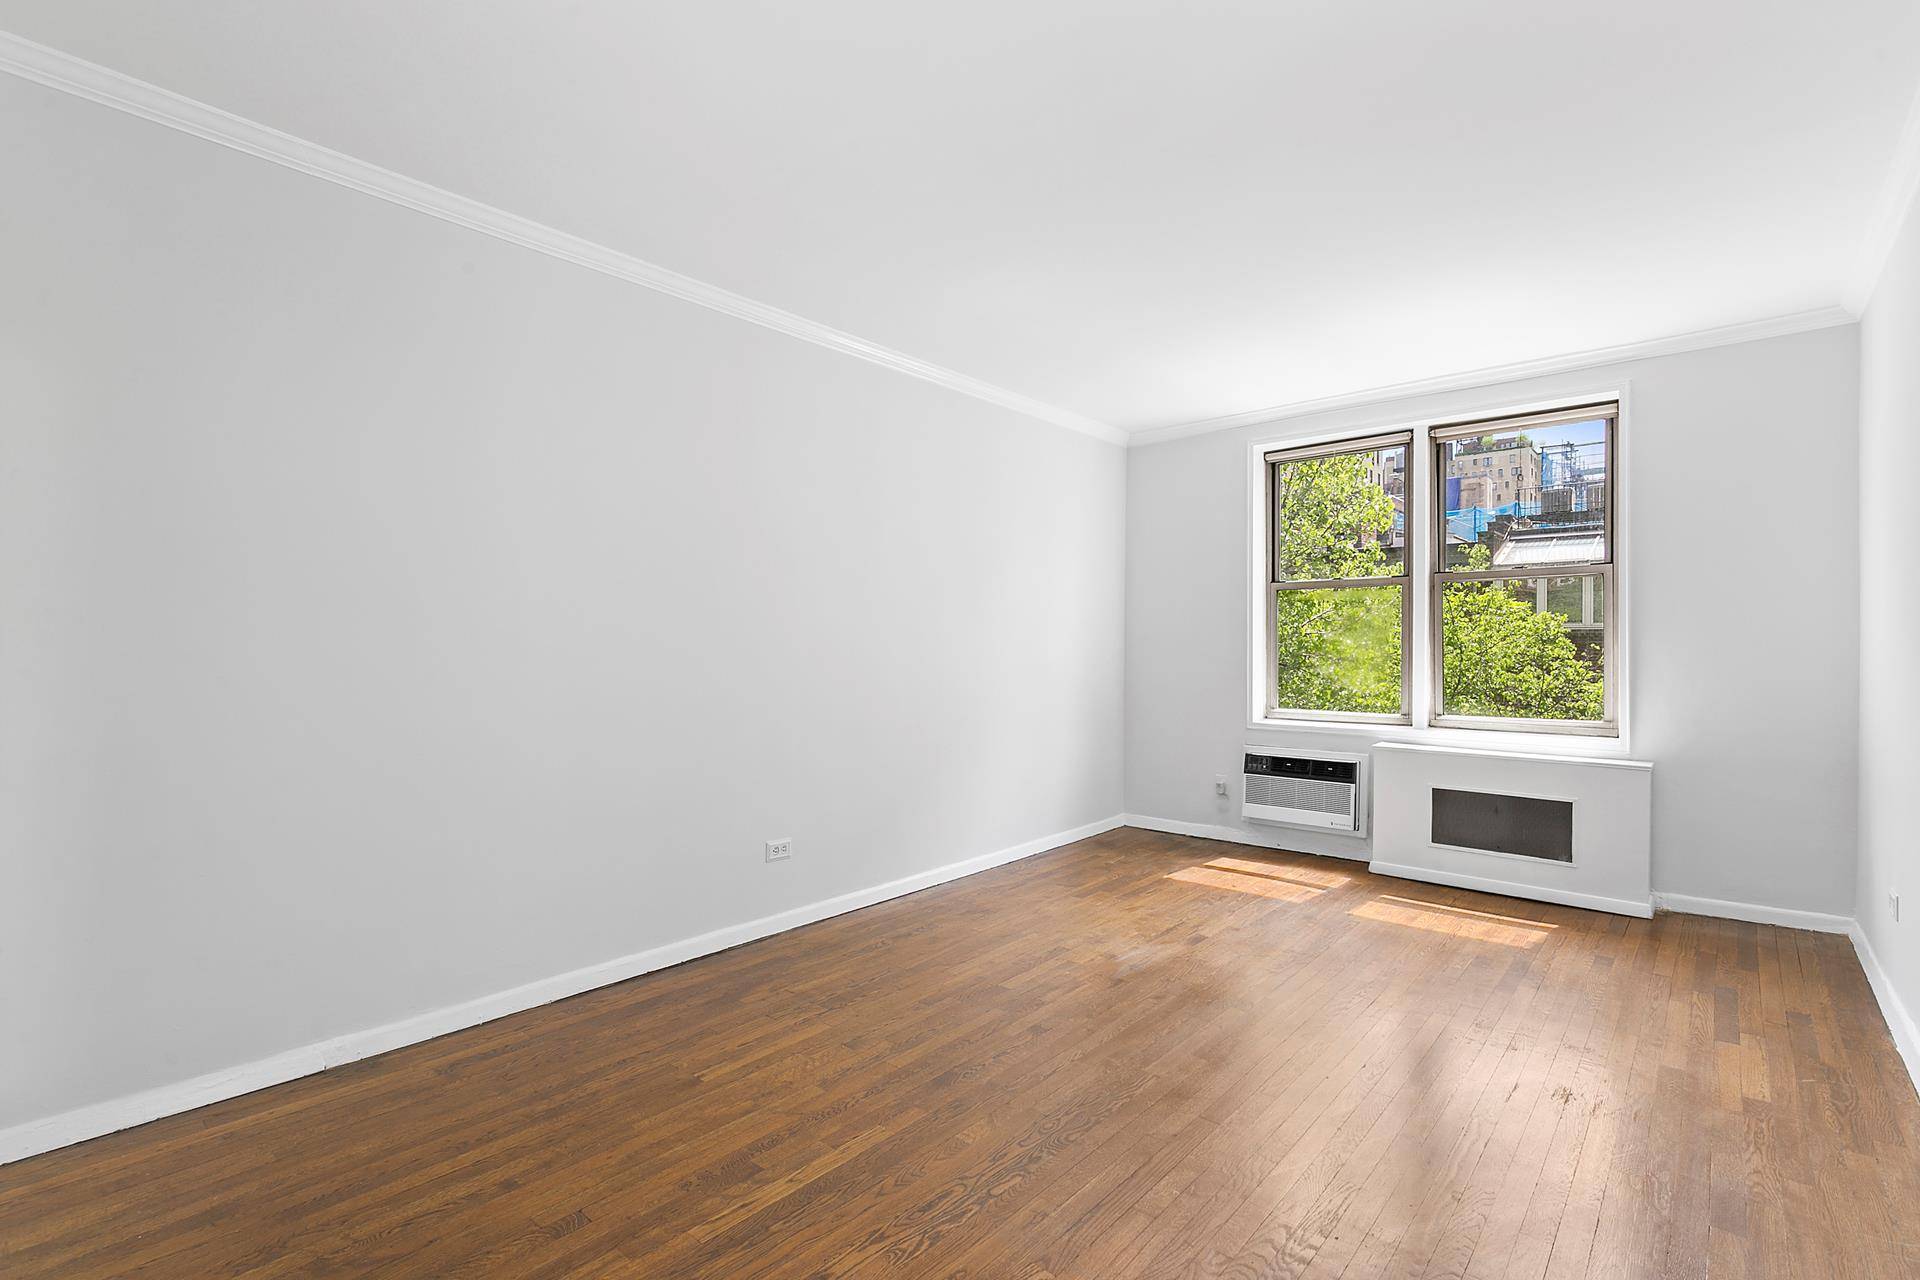 Apartment 5B at 64 East 94th Street in Carnegie Hill, is bathed in light, overlooking rear gardens and pin drop quiet.